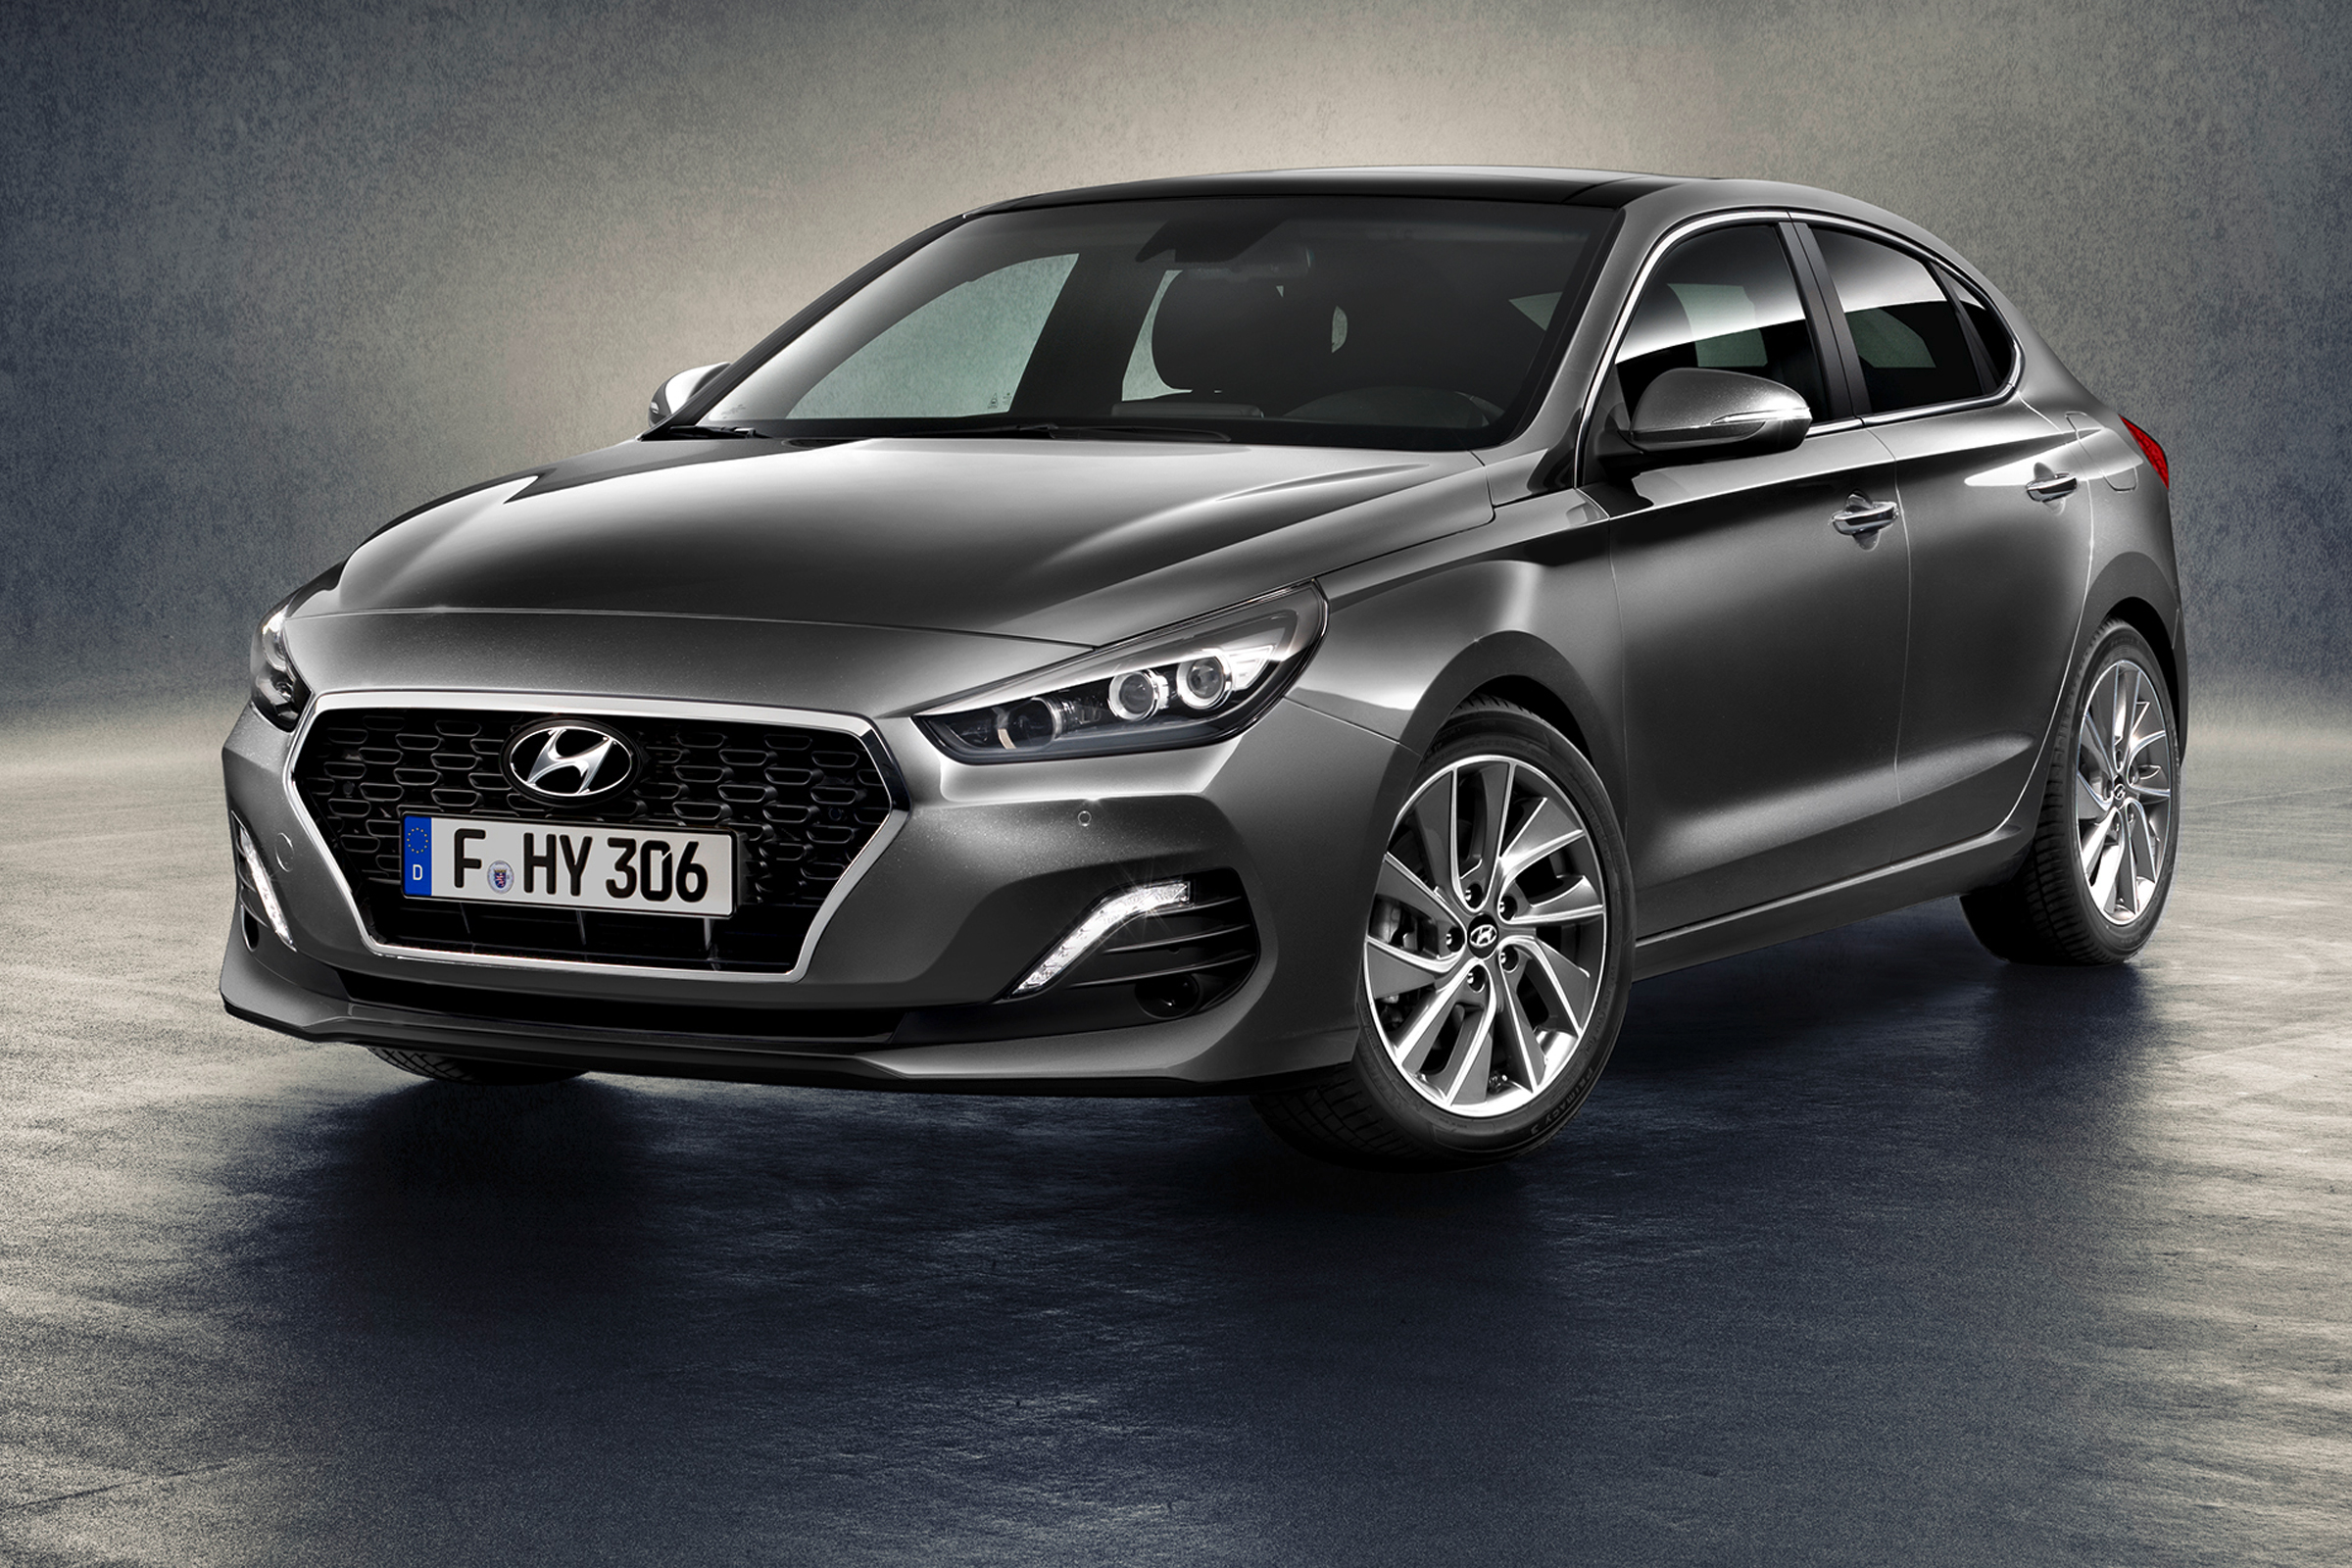 Hyundai i30 Fastback: prices, specs and on-sale date